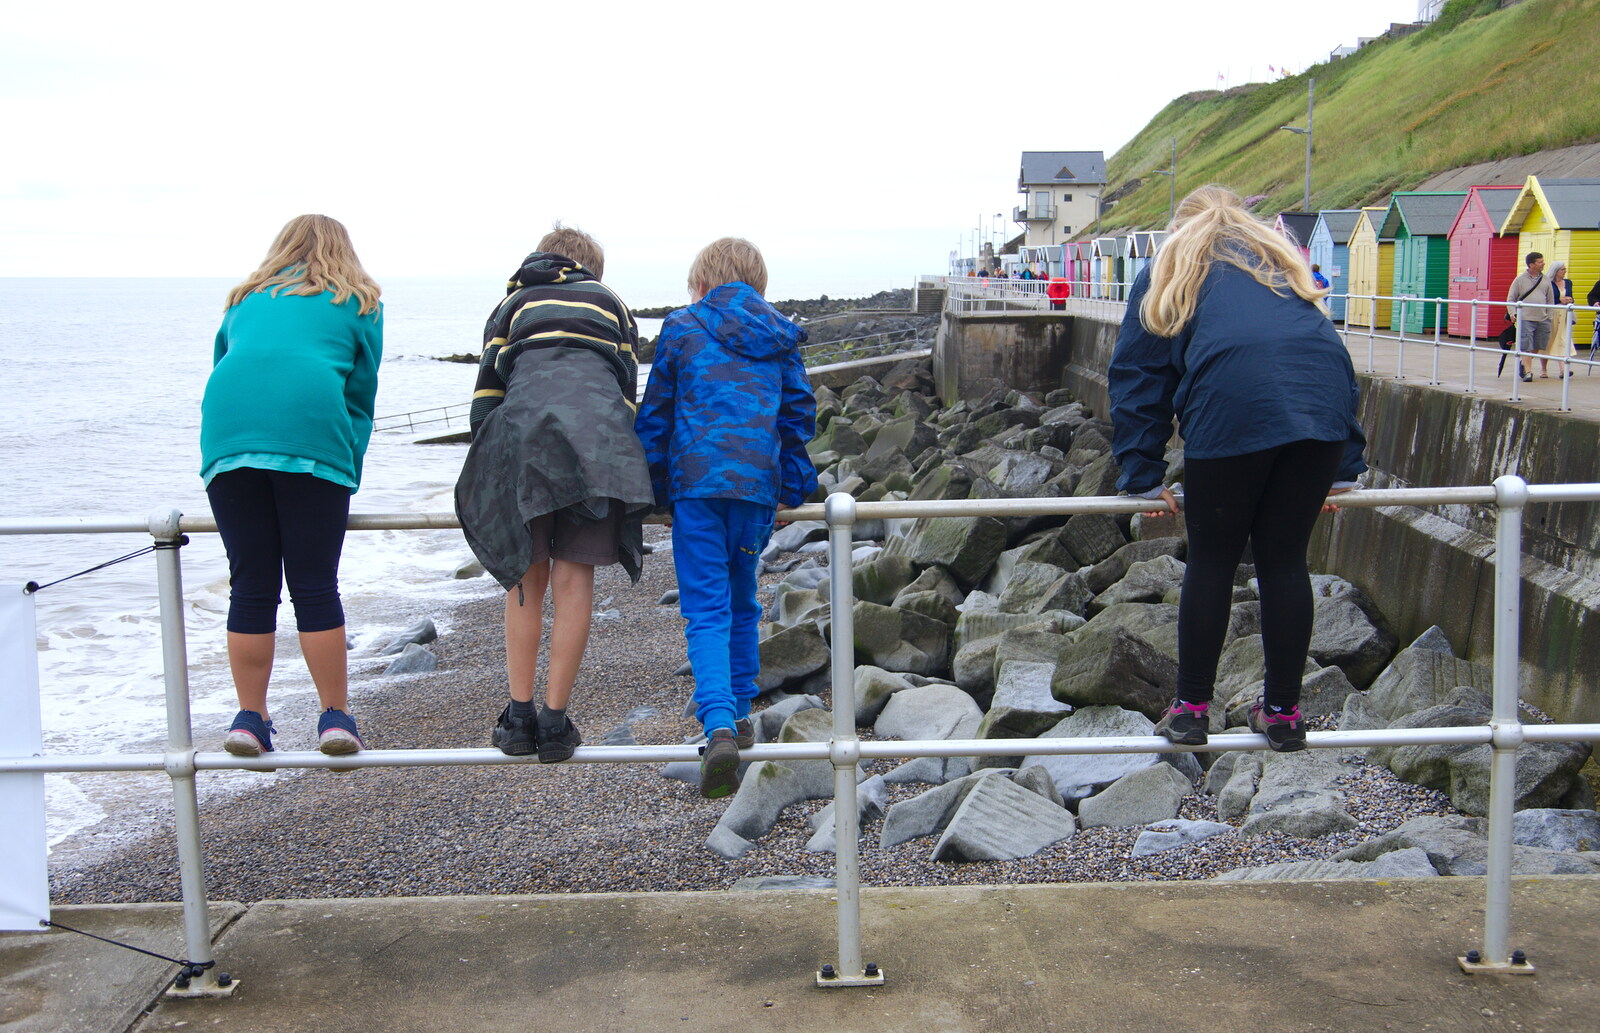 The children stand on a railing from Kelling Camping and the Potty Morris Festival, Sheringham, North Norfolk - 6th July 2019